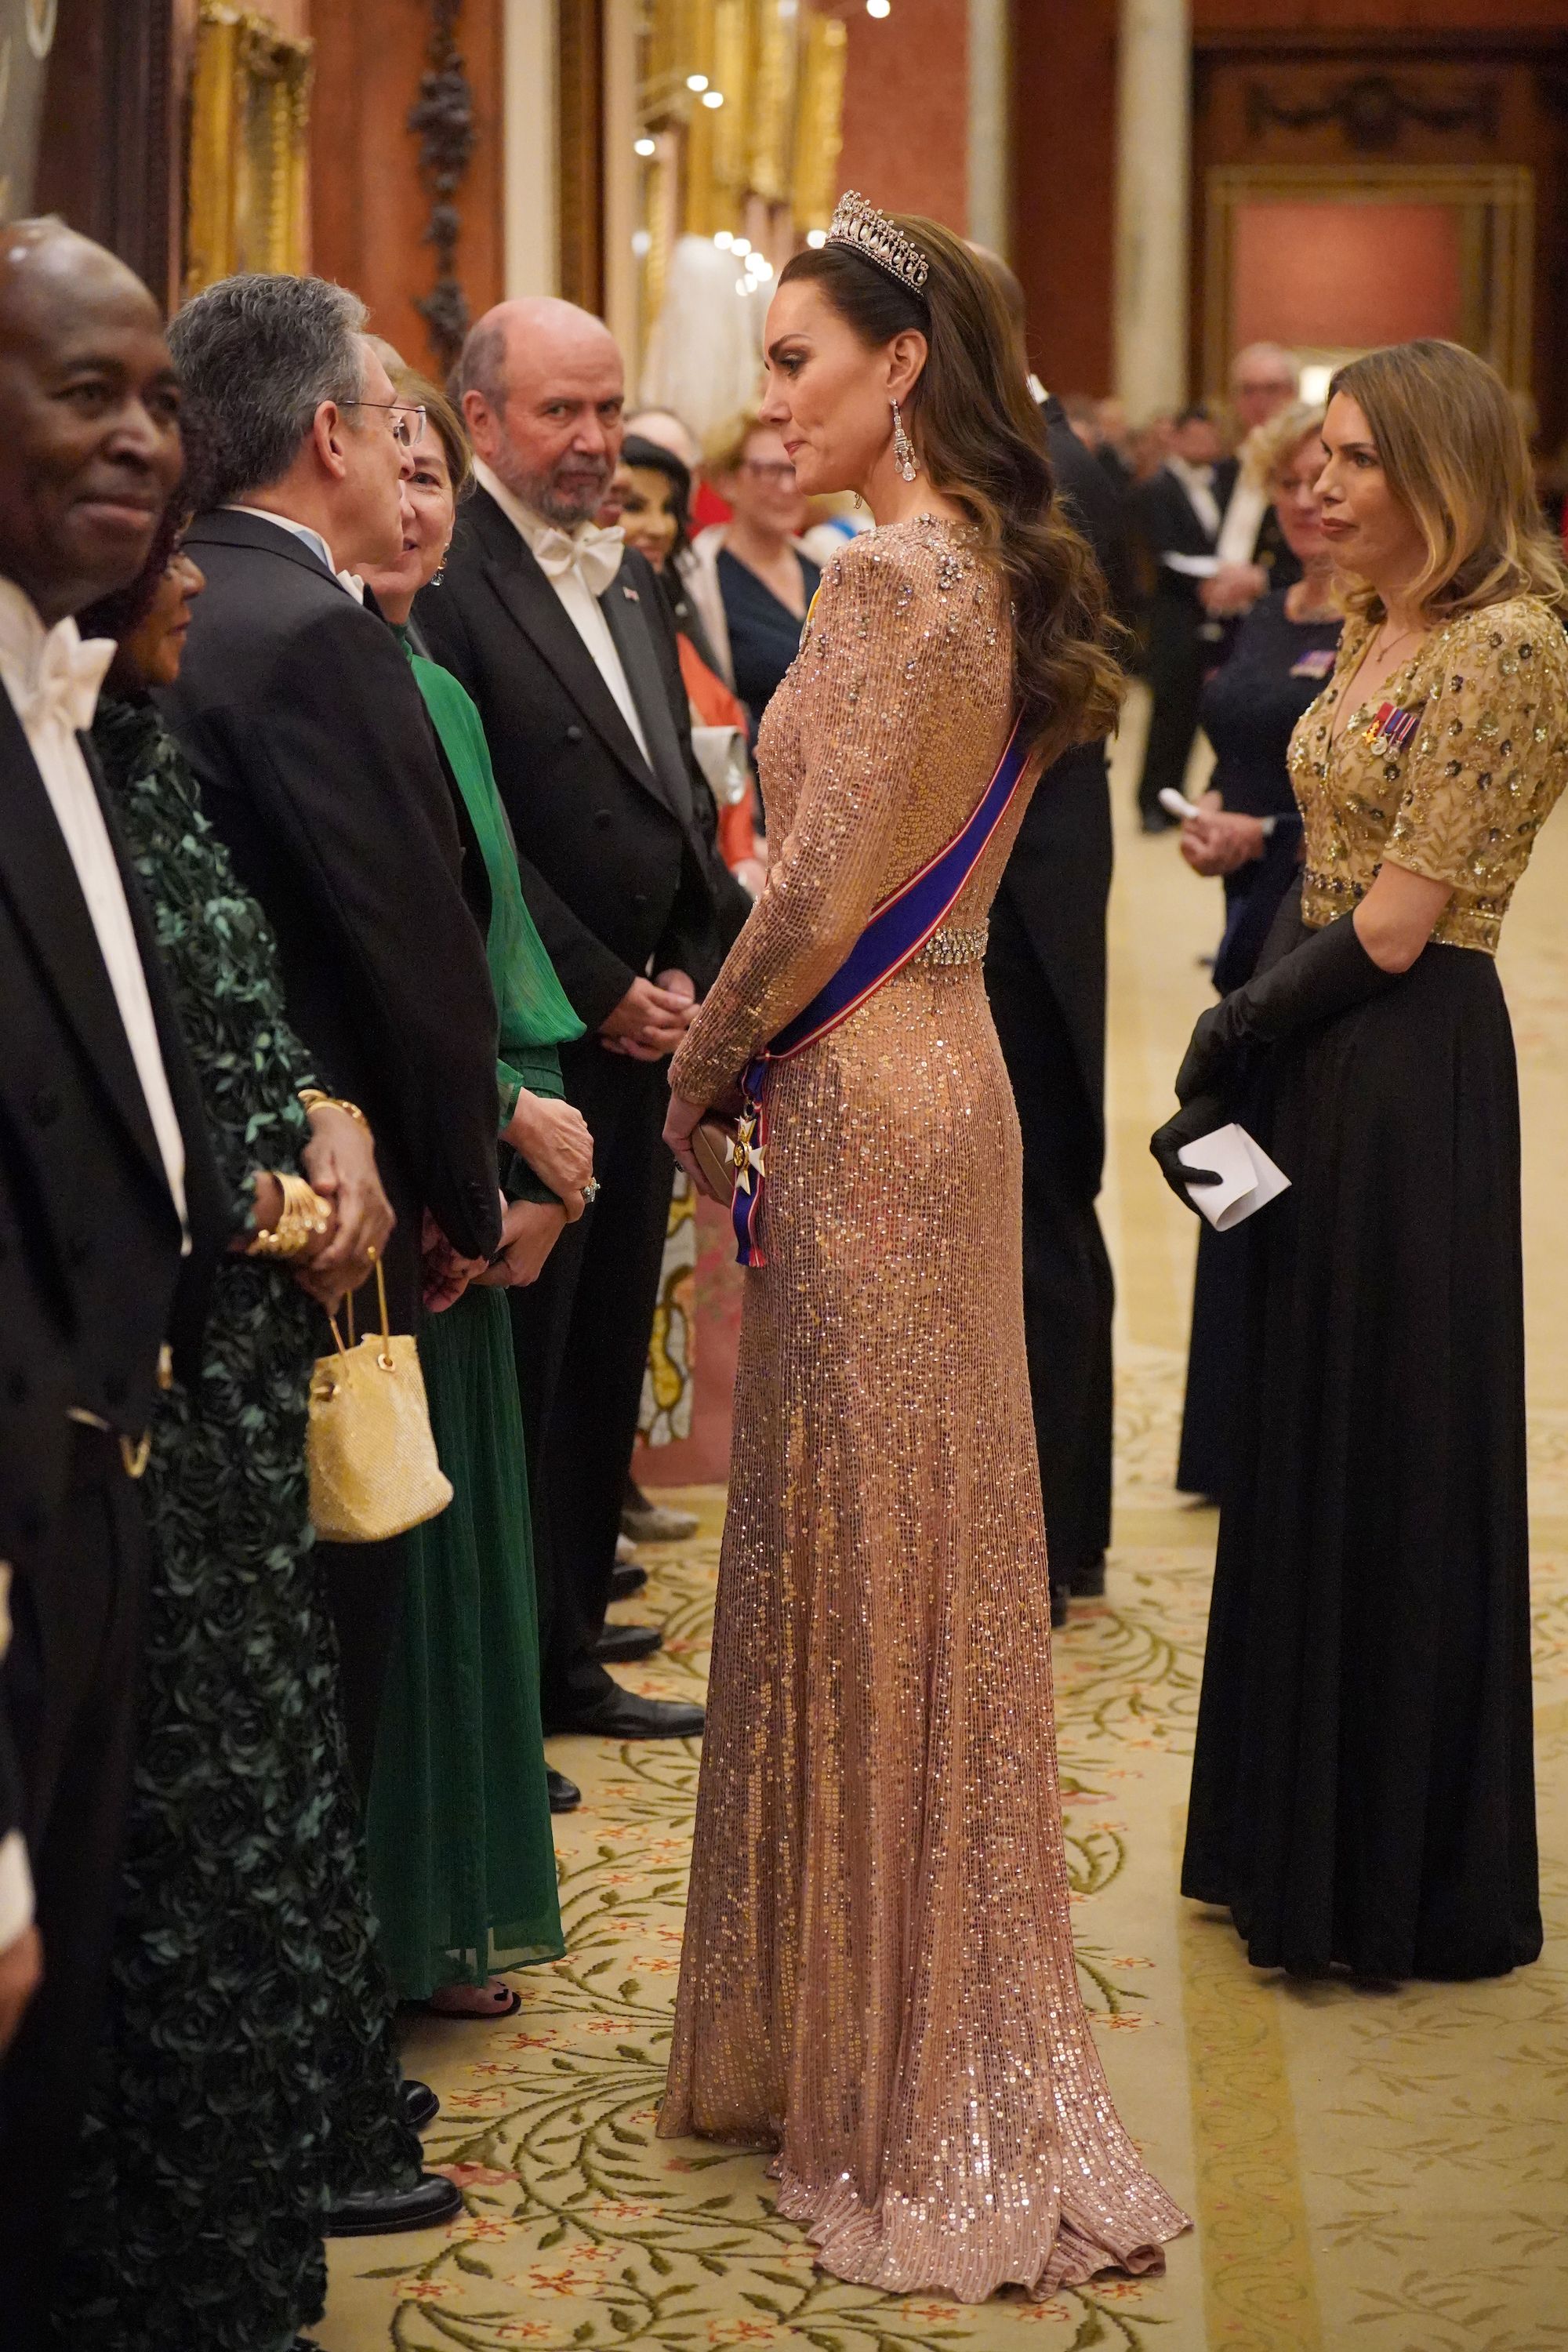 Kate wears rarely seen tiara and flowing gown at state banquet